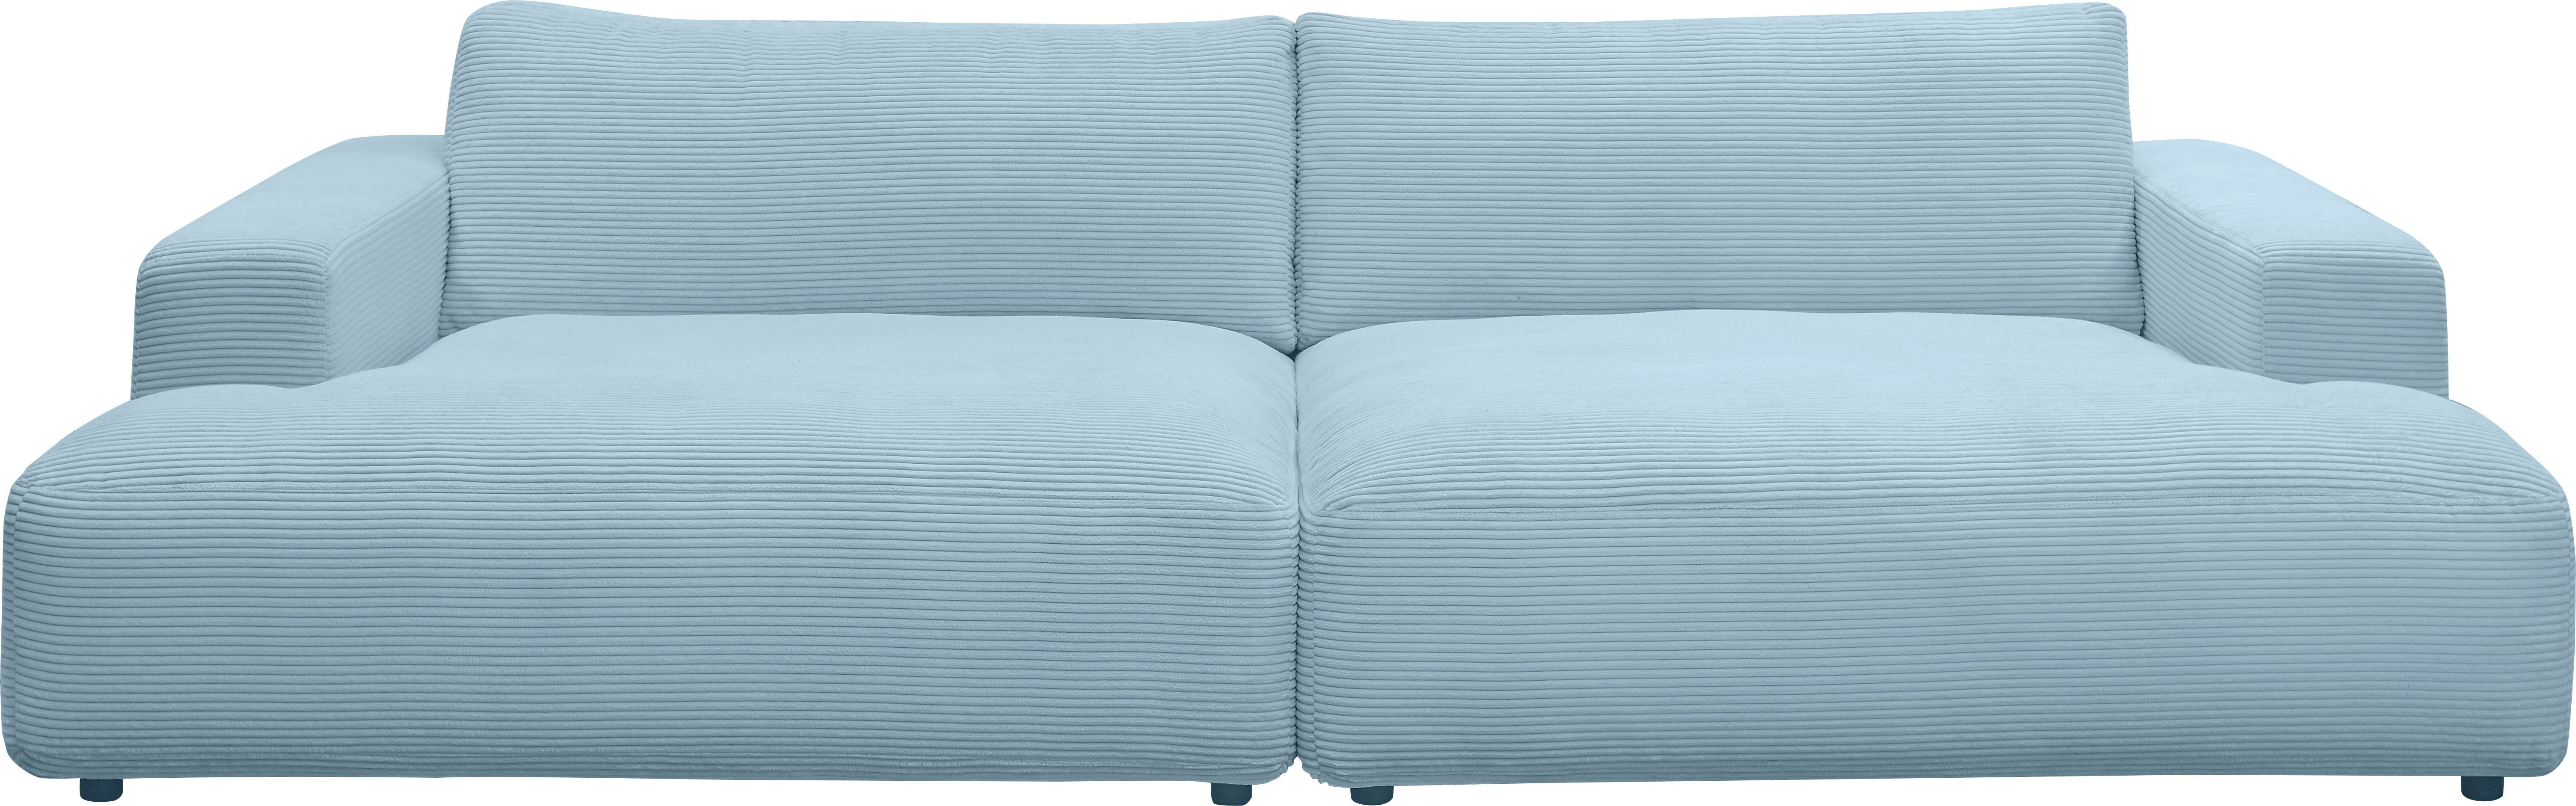 Breite M Lucia, cm GALLERY by Loungesofa Cord-Bezug, branded light-blue 292 Musterring